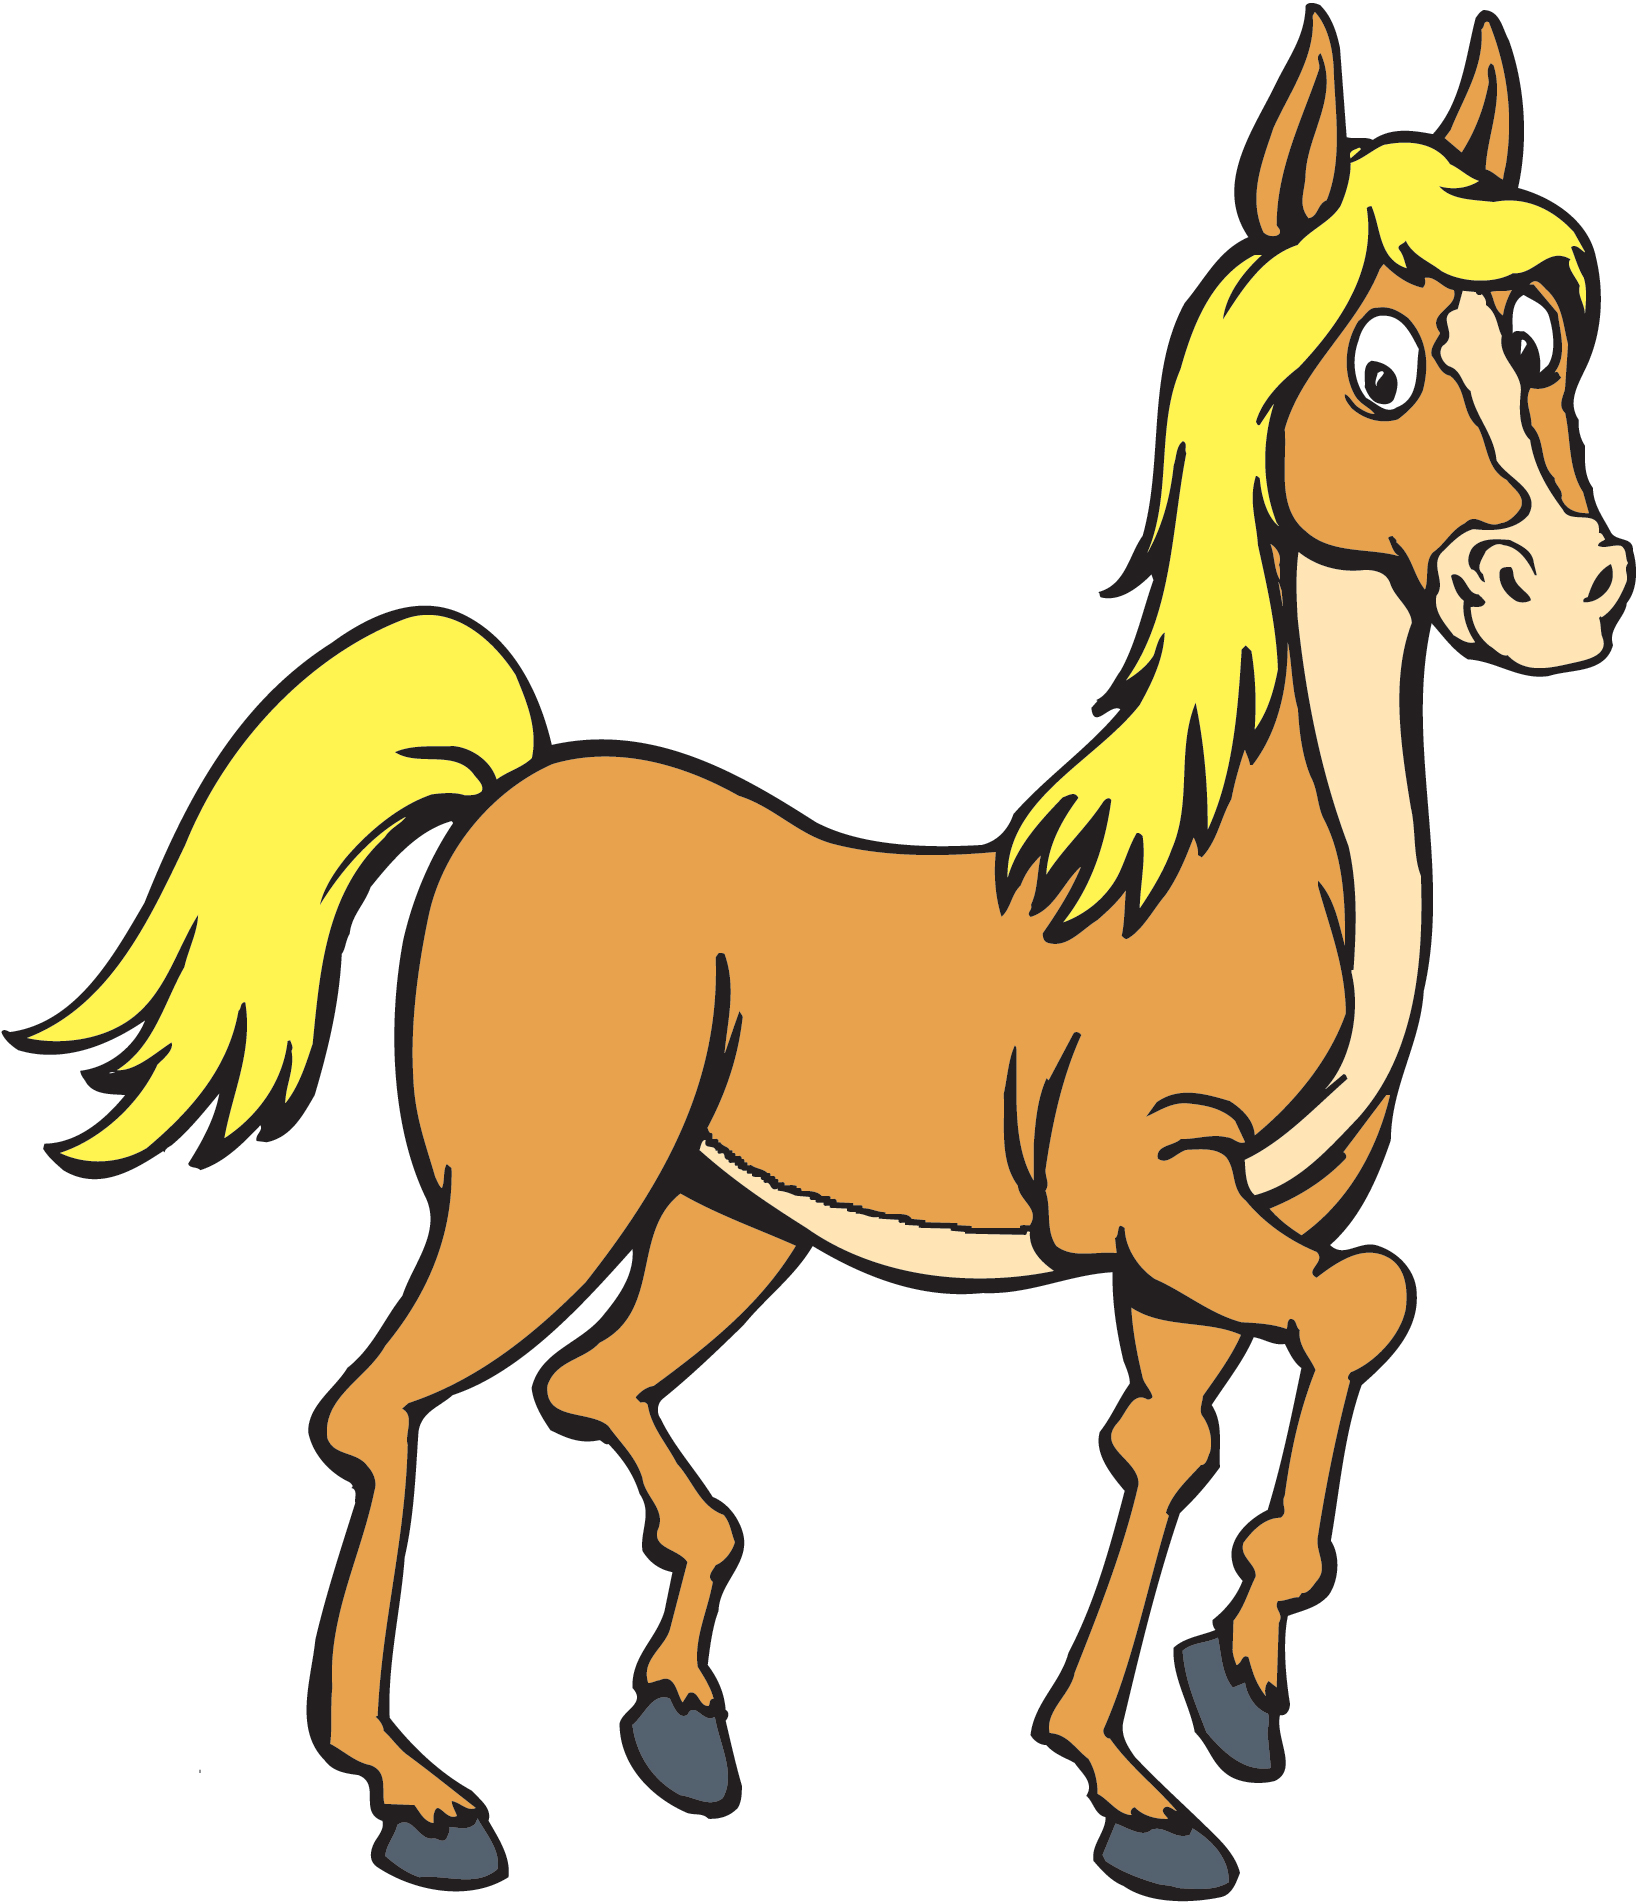 Horse related clipart - Horses Clipart